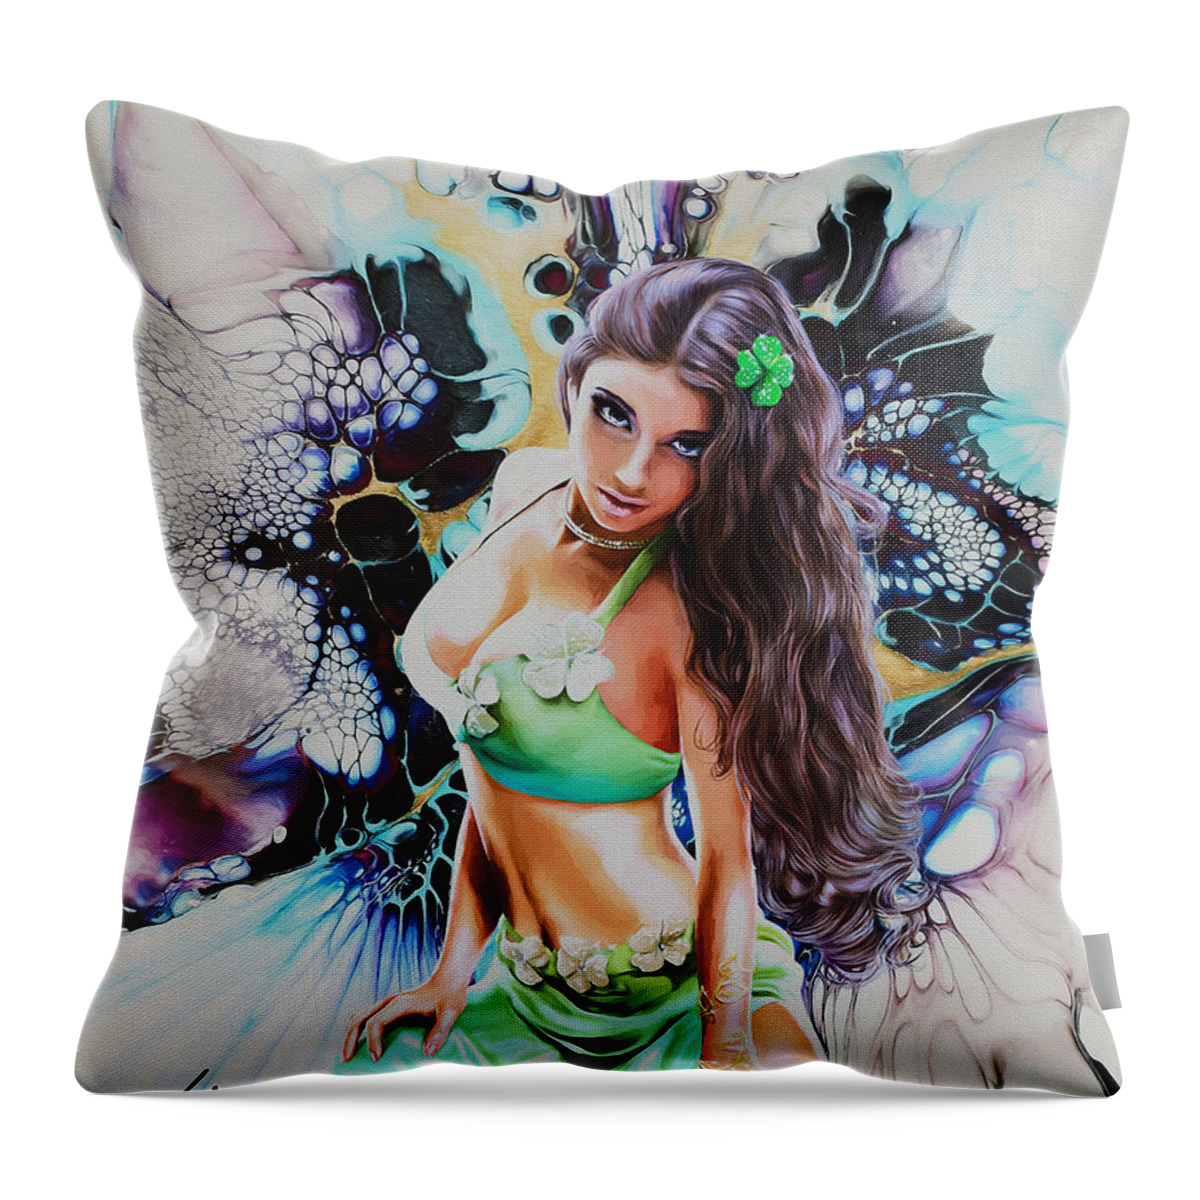 Paint Throw Pillow featuring the painting Mystic Lady by Nenad Vasic